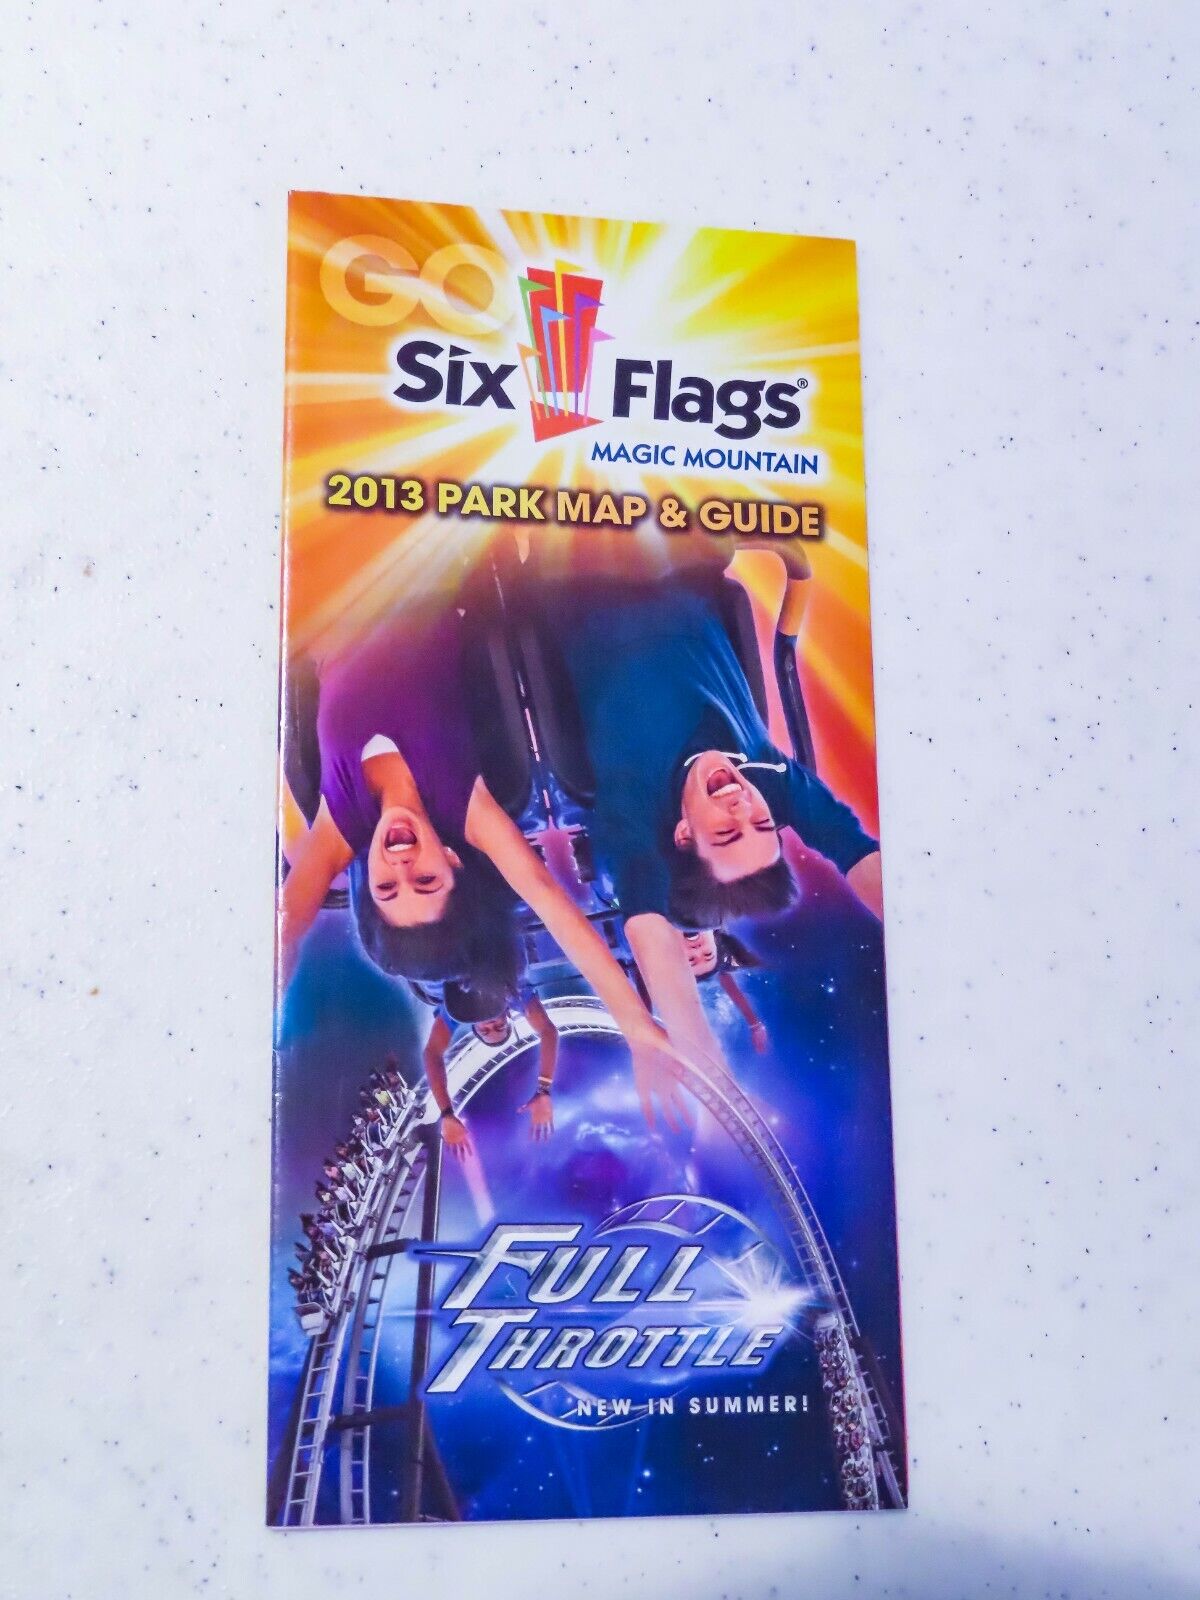 2013 Six Flags Magic Mountain Park Map. featuring Full Throttle